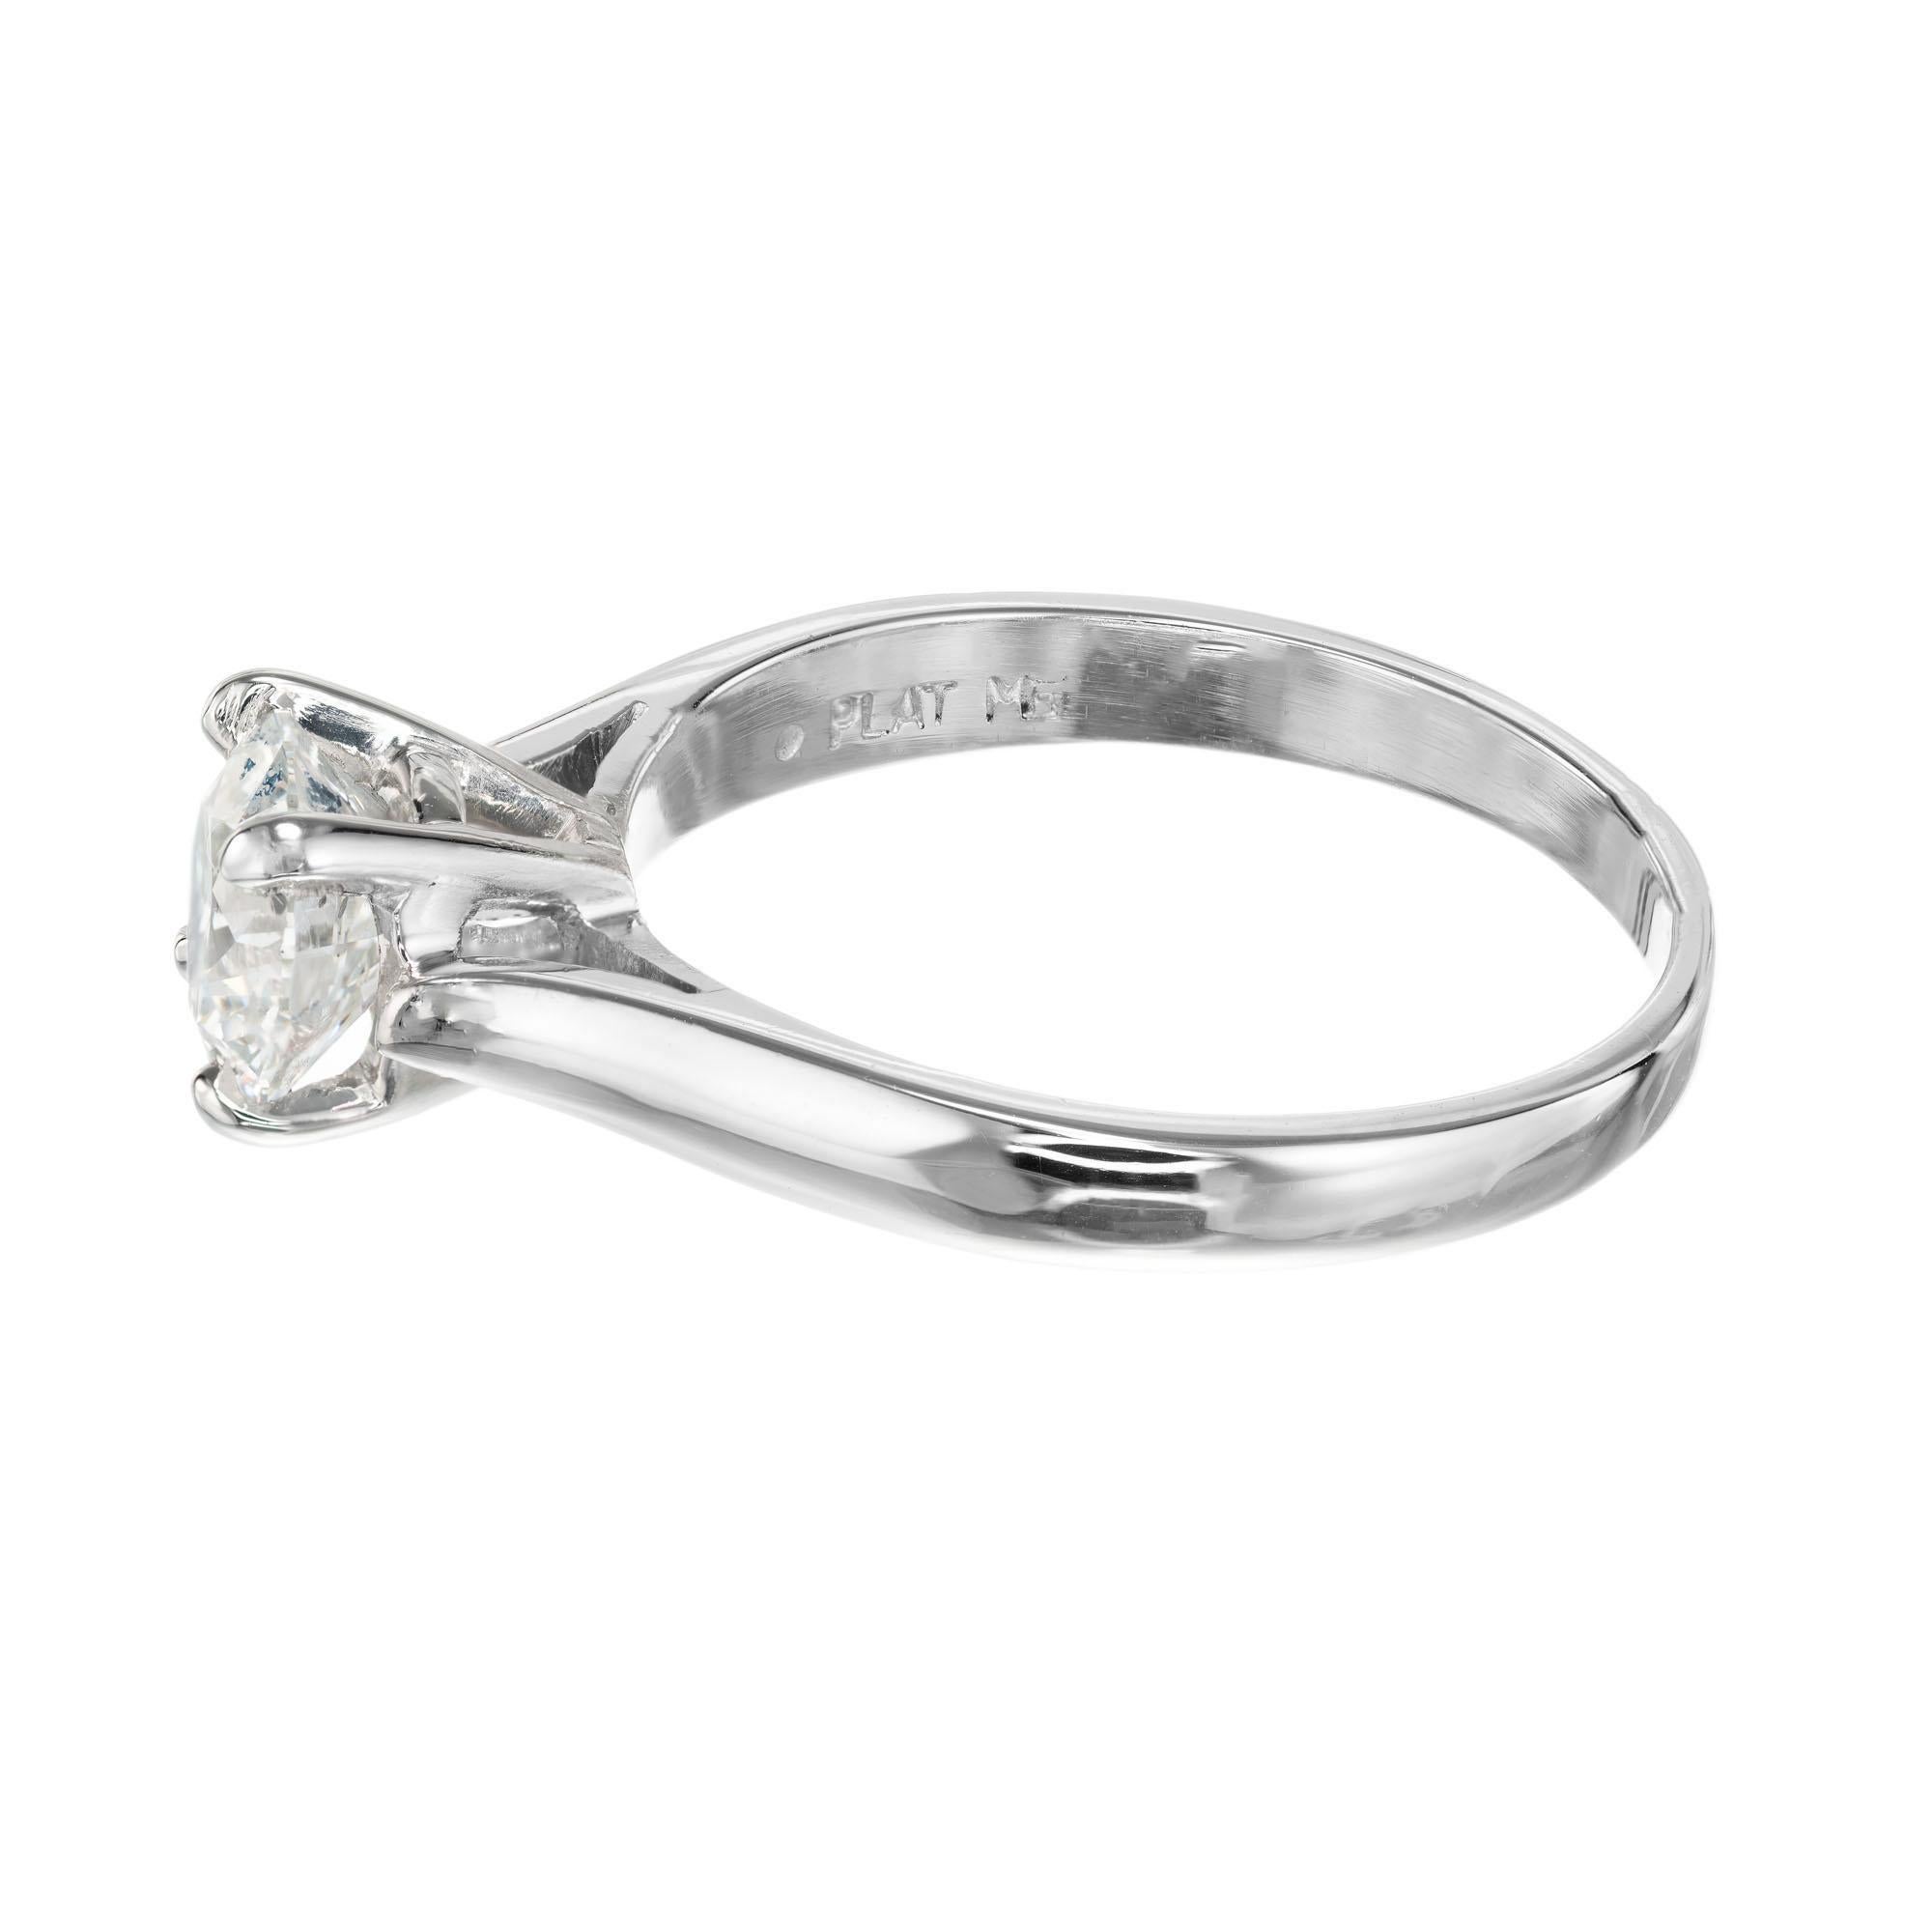 Peter Suchy GIA Certified 1.09 Carat Diamond Platinum Solitaire Engagement Ring In New Condition For Sale In Stamford, CT